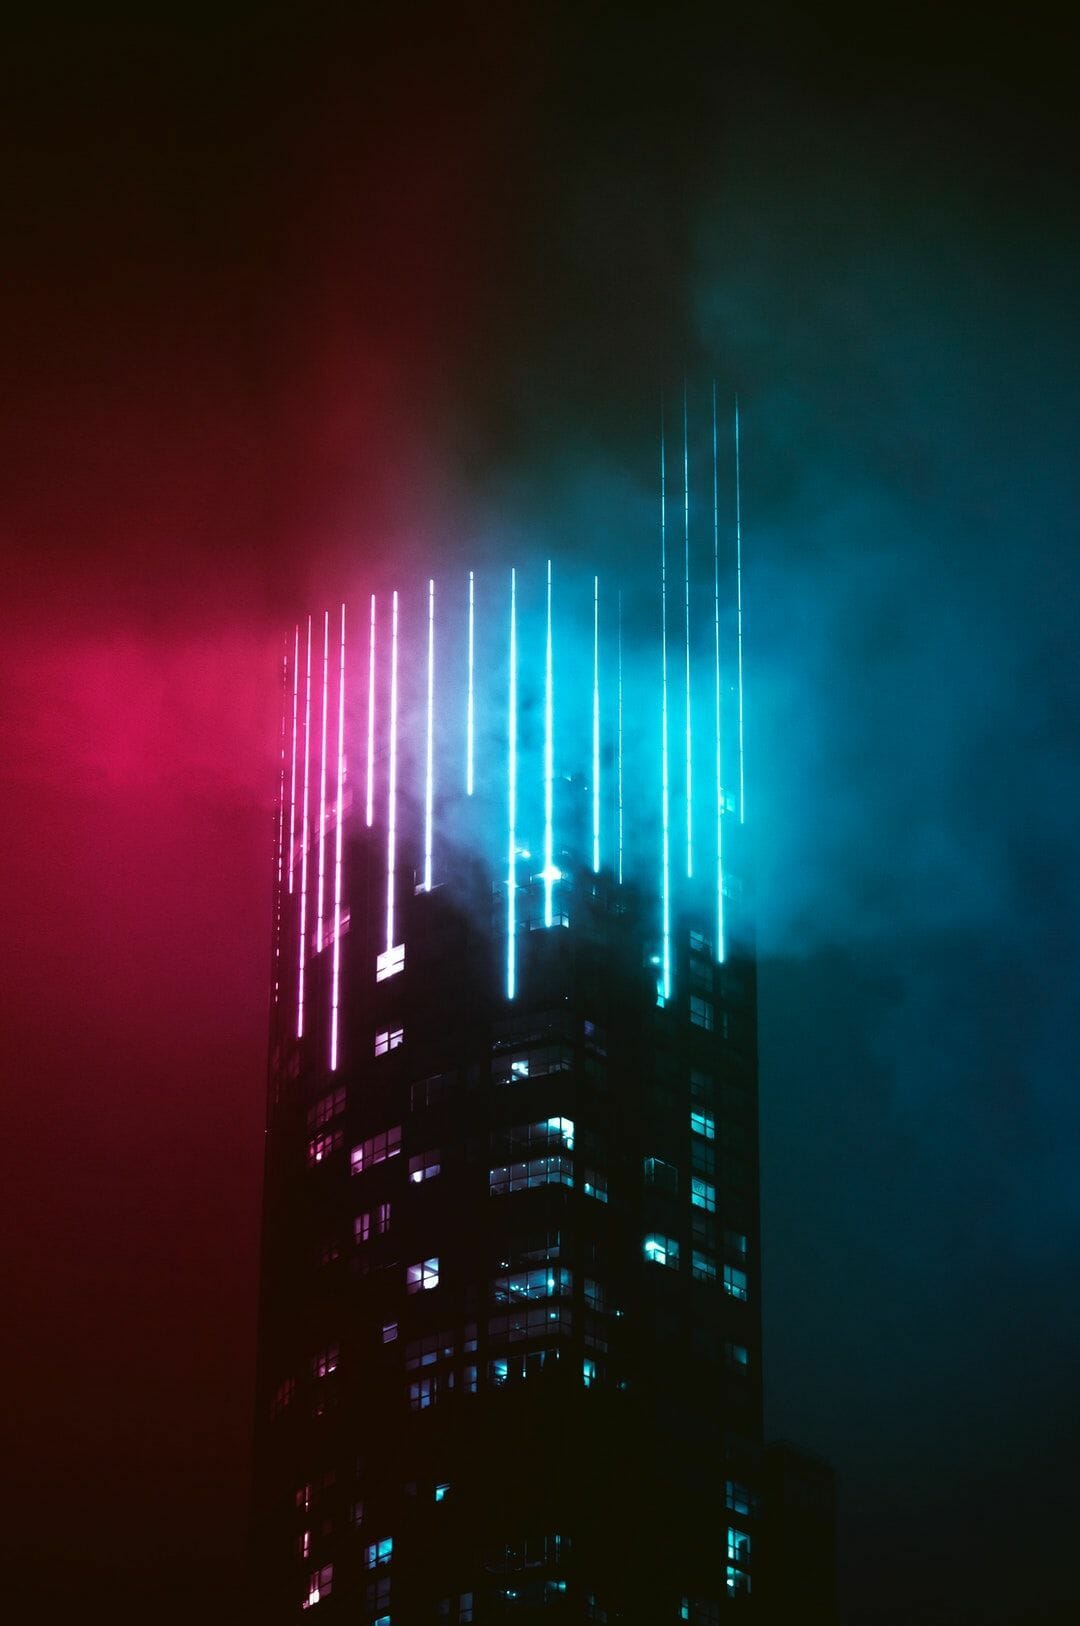 Chill Aesthetic HD Wallpaper (Desktop Background / Android / iPhone) (1080p, 4k) (1080x1626) (2022)